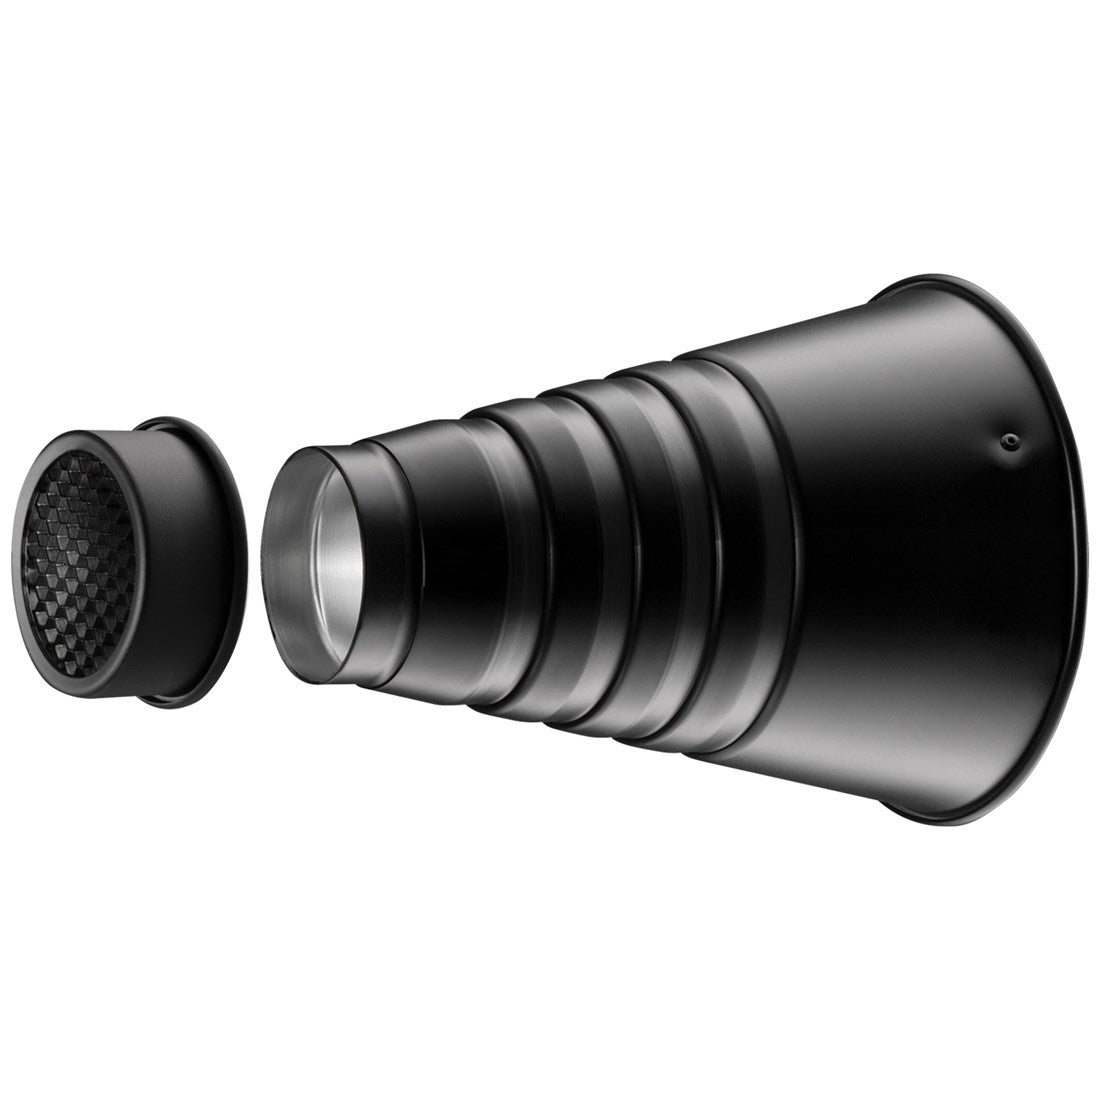 Product Image of Westcott Snoot with Honeycomb Grid (Bowens/Godox Mount)